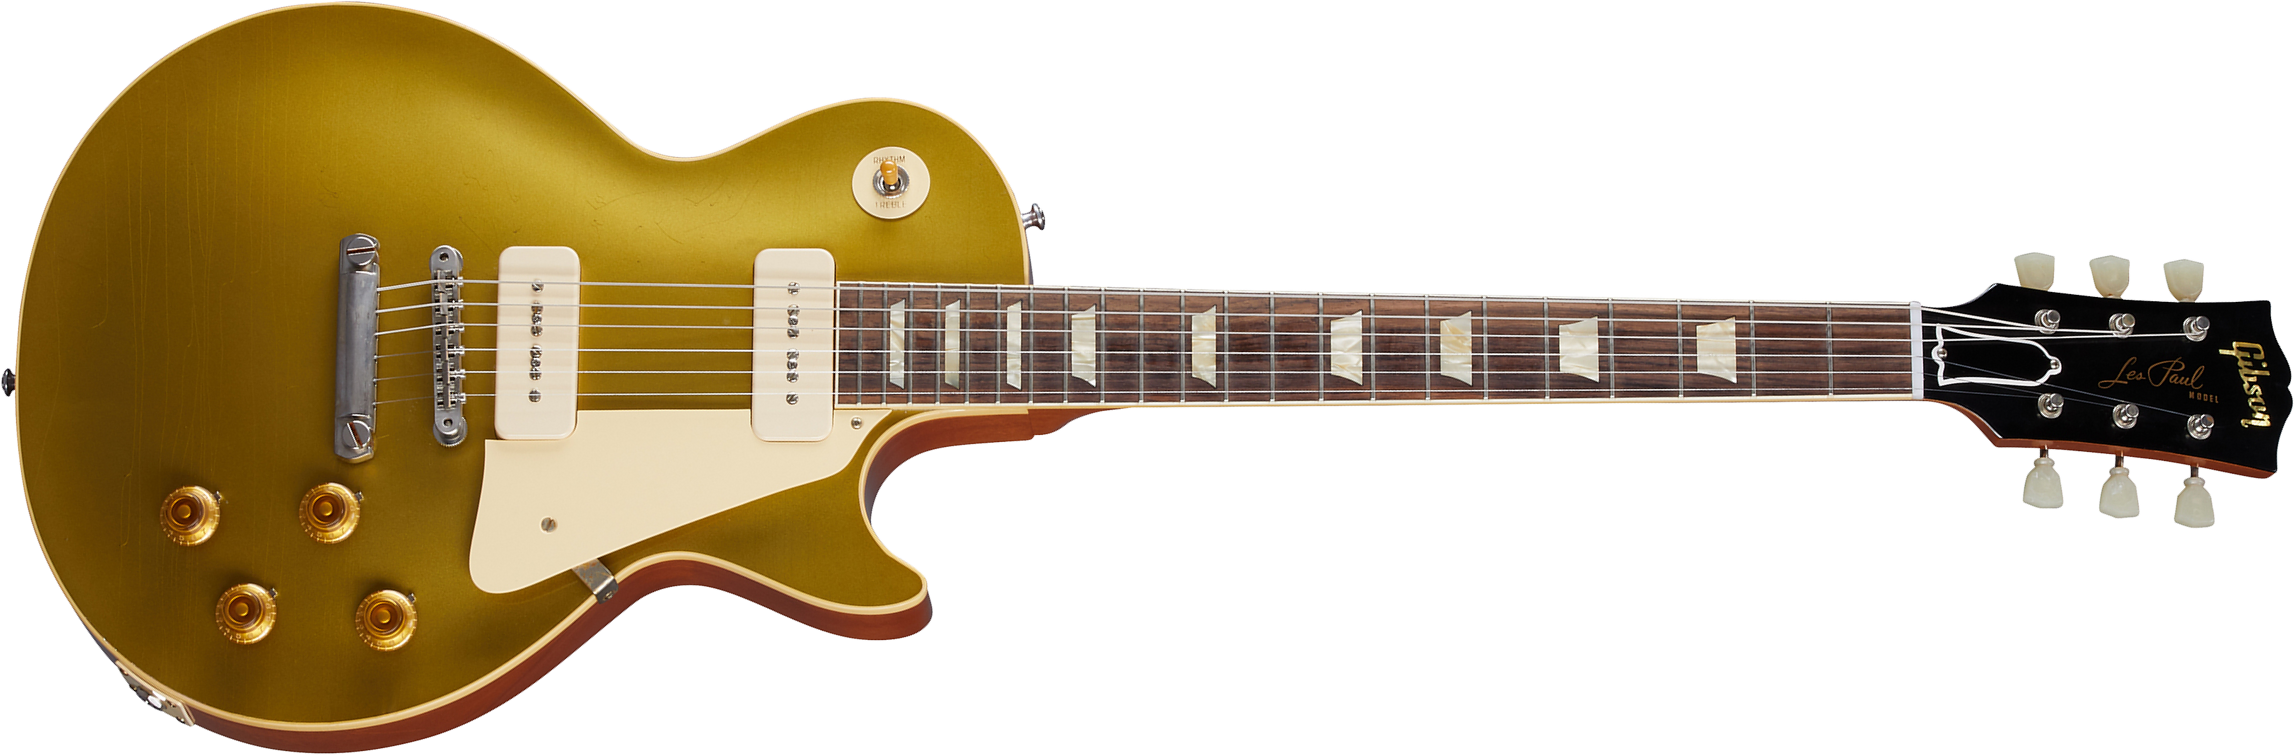 Gibson Custom Shop Murphy Lab Les Paul Goldtop 1956 Reissue 2p90 Ht Rw - Ultra Light Aged Double Gold - Single cut electric guitar - Main picture